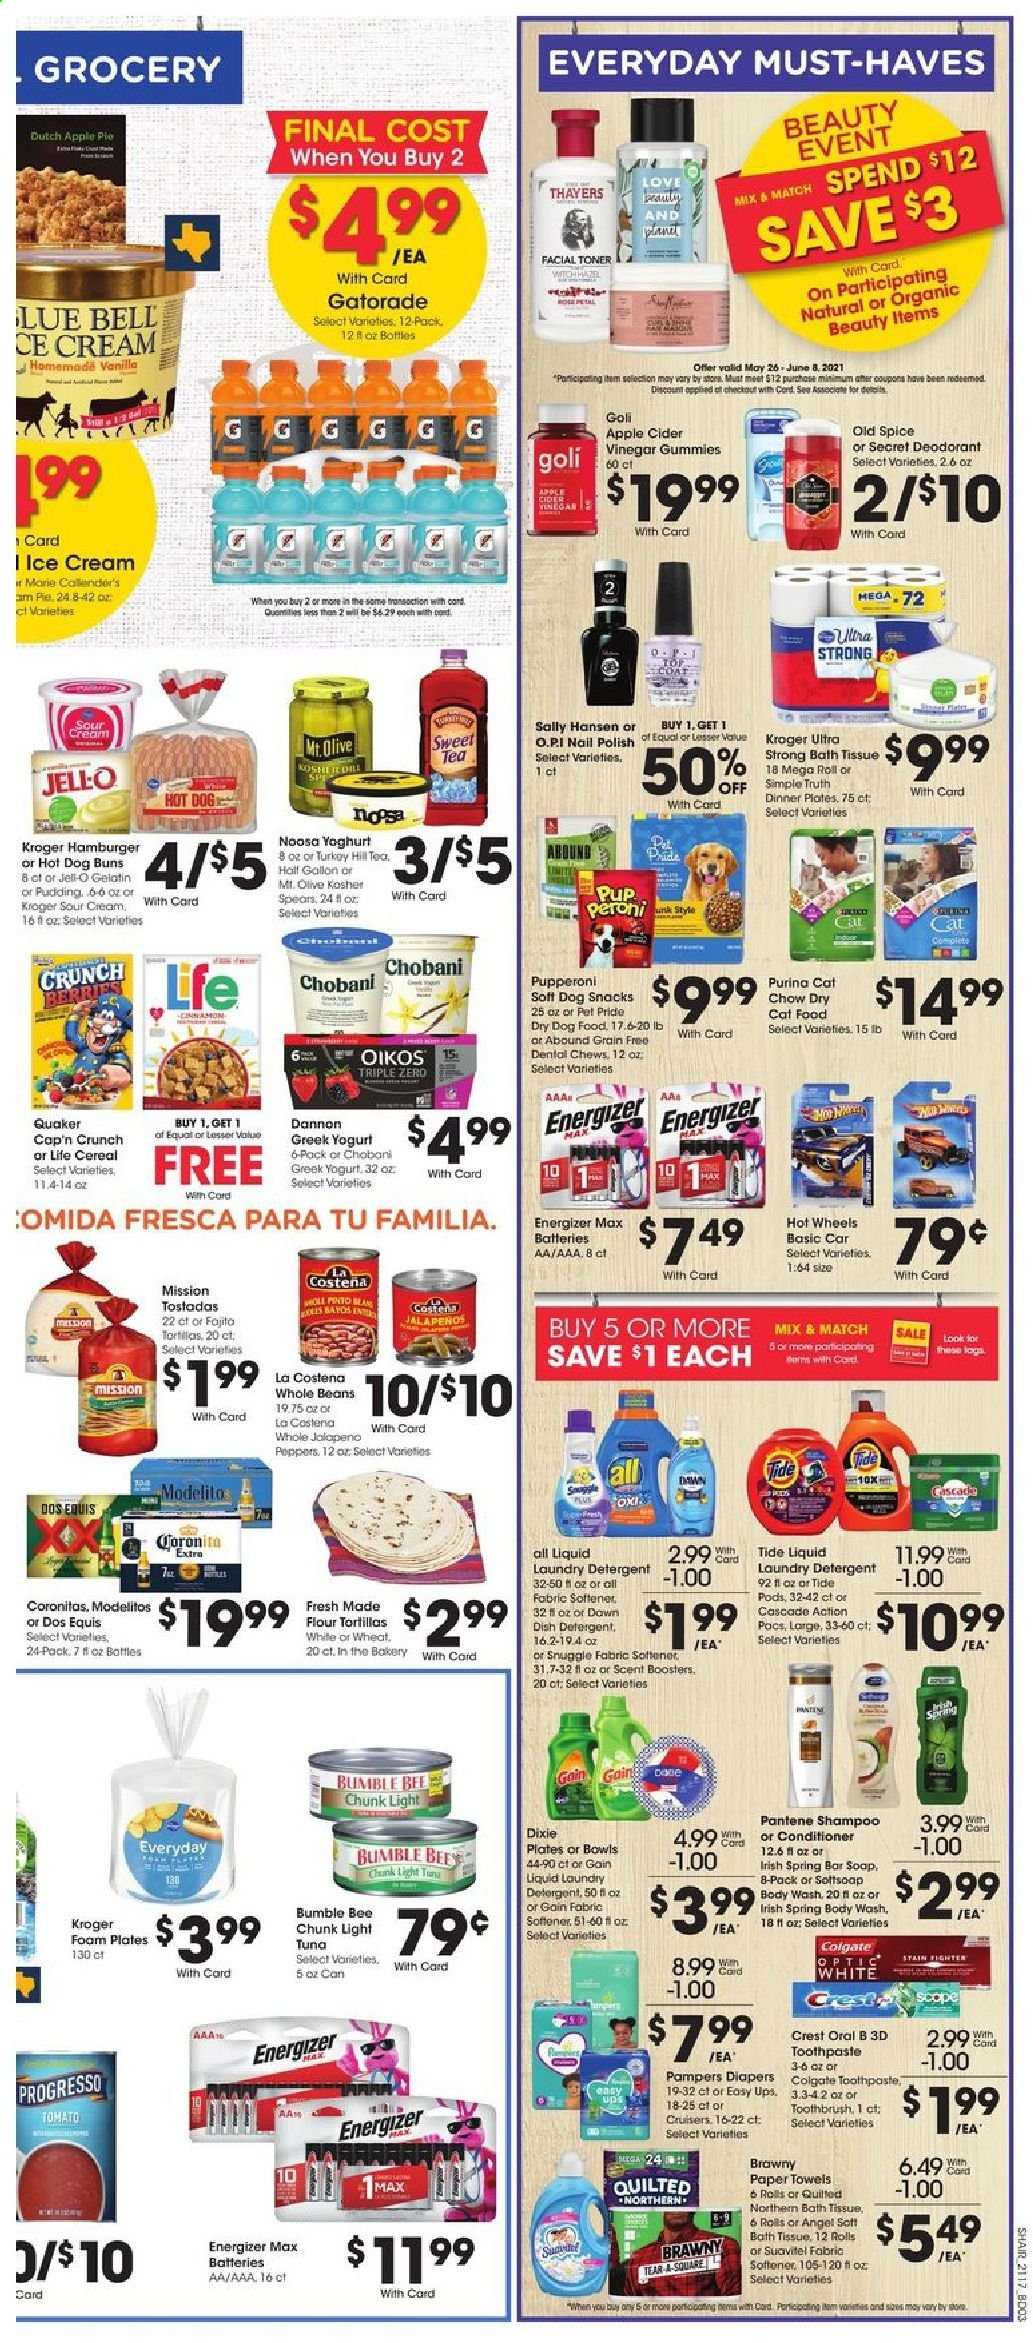 thumbnail - Kroger Flyer - 05/26/2021 - 06/01/2021 - Sales products - gallon, tortillas, pie, buns, tostadas, flour tortillas, apple pie, beans, jalapeño, Bumble Bee, fajita, Quaker, Progresso, Marie Callender's, greek yoghurt, yoghurt, Oikos, Chobani, Dannon, sour cream, ice cream, chewing gum, Jell-O, light tuna, cereals, Cap'n Crunch, spice, apple cider vinegar, vinegar, Gatorade, tea, beer, Dos Equis, Peroni, Pampers, nappies, bath tissue, Quilted Northern, kitchen towels, paper towels, detergent, Gain, Cascade, Snuggle, Tide, fabric softener, laundry detergent, scent booster, body wash, shampoo, Old Spice, soap bar, soap, Colgate, toothbrush, Oral-B, toothpaste, Crest, conditioner, Pantene, anti-perspirant, deodorant, Sally Hansen, polish, Dixie, plate, dinner plate, battery, Energizer, dental chews, animal food, cat food, dog food, Purina, dry dog food, dry cat food, toner, coat, Hot Wheels. Page 6.